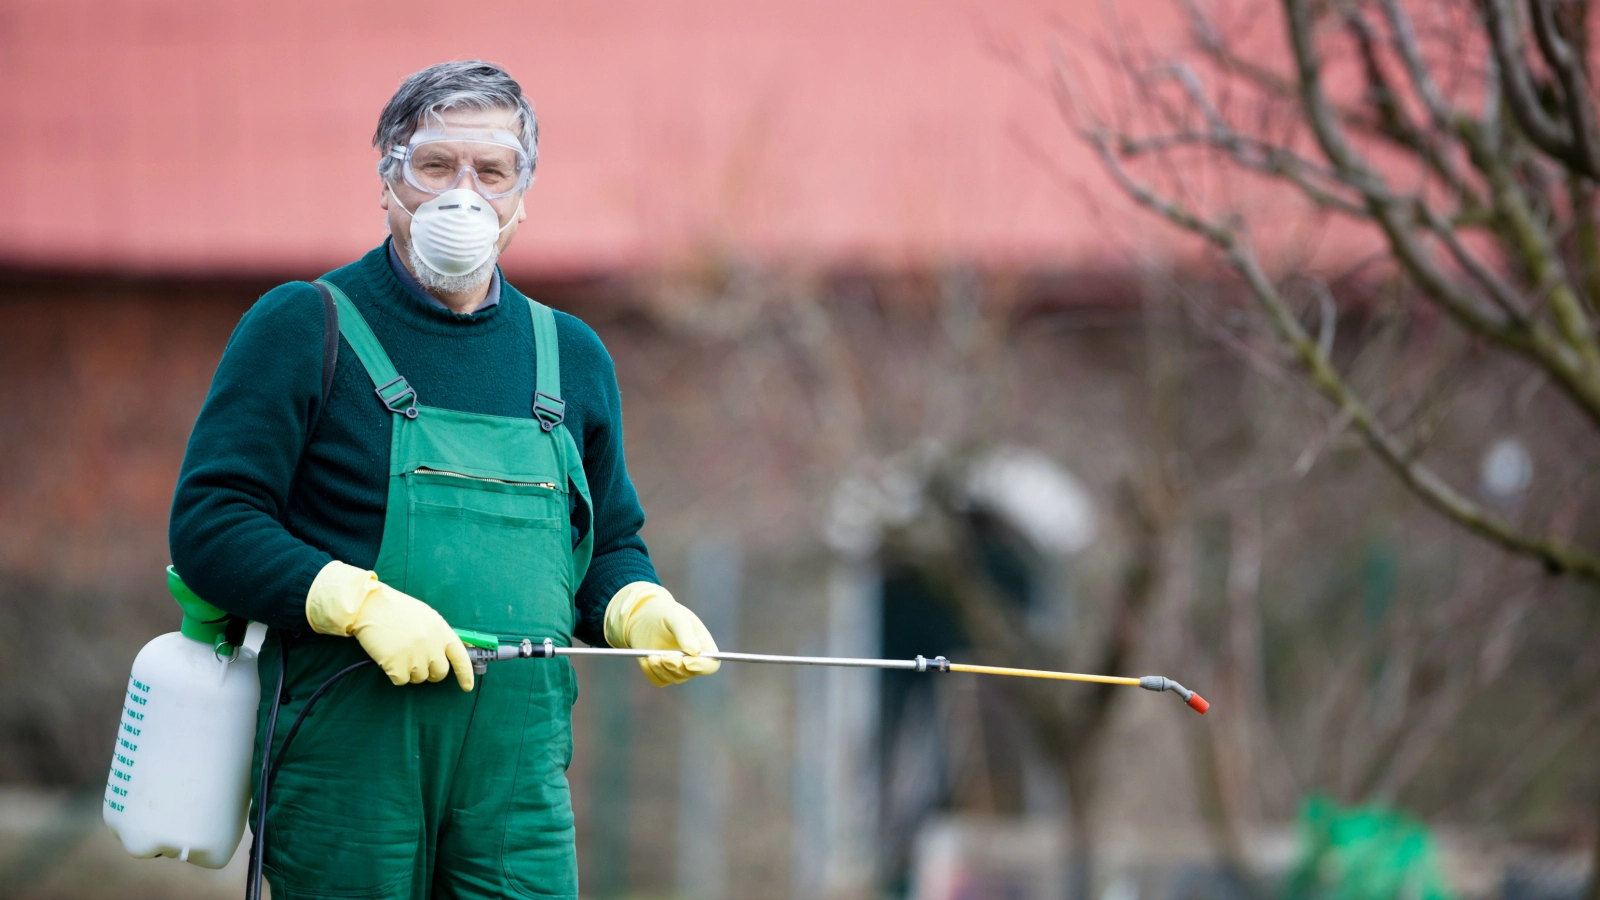 How can you protect yourself from pesticide exposure